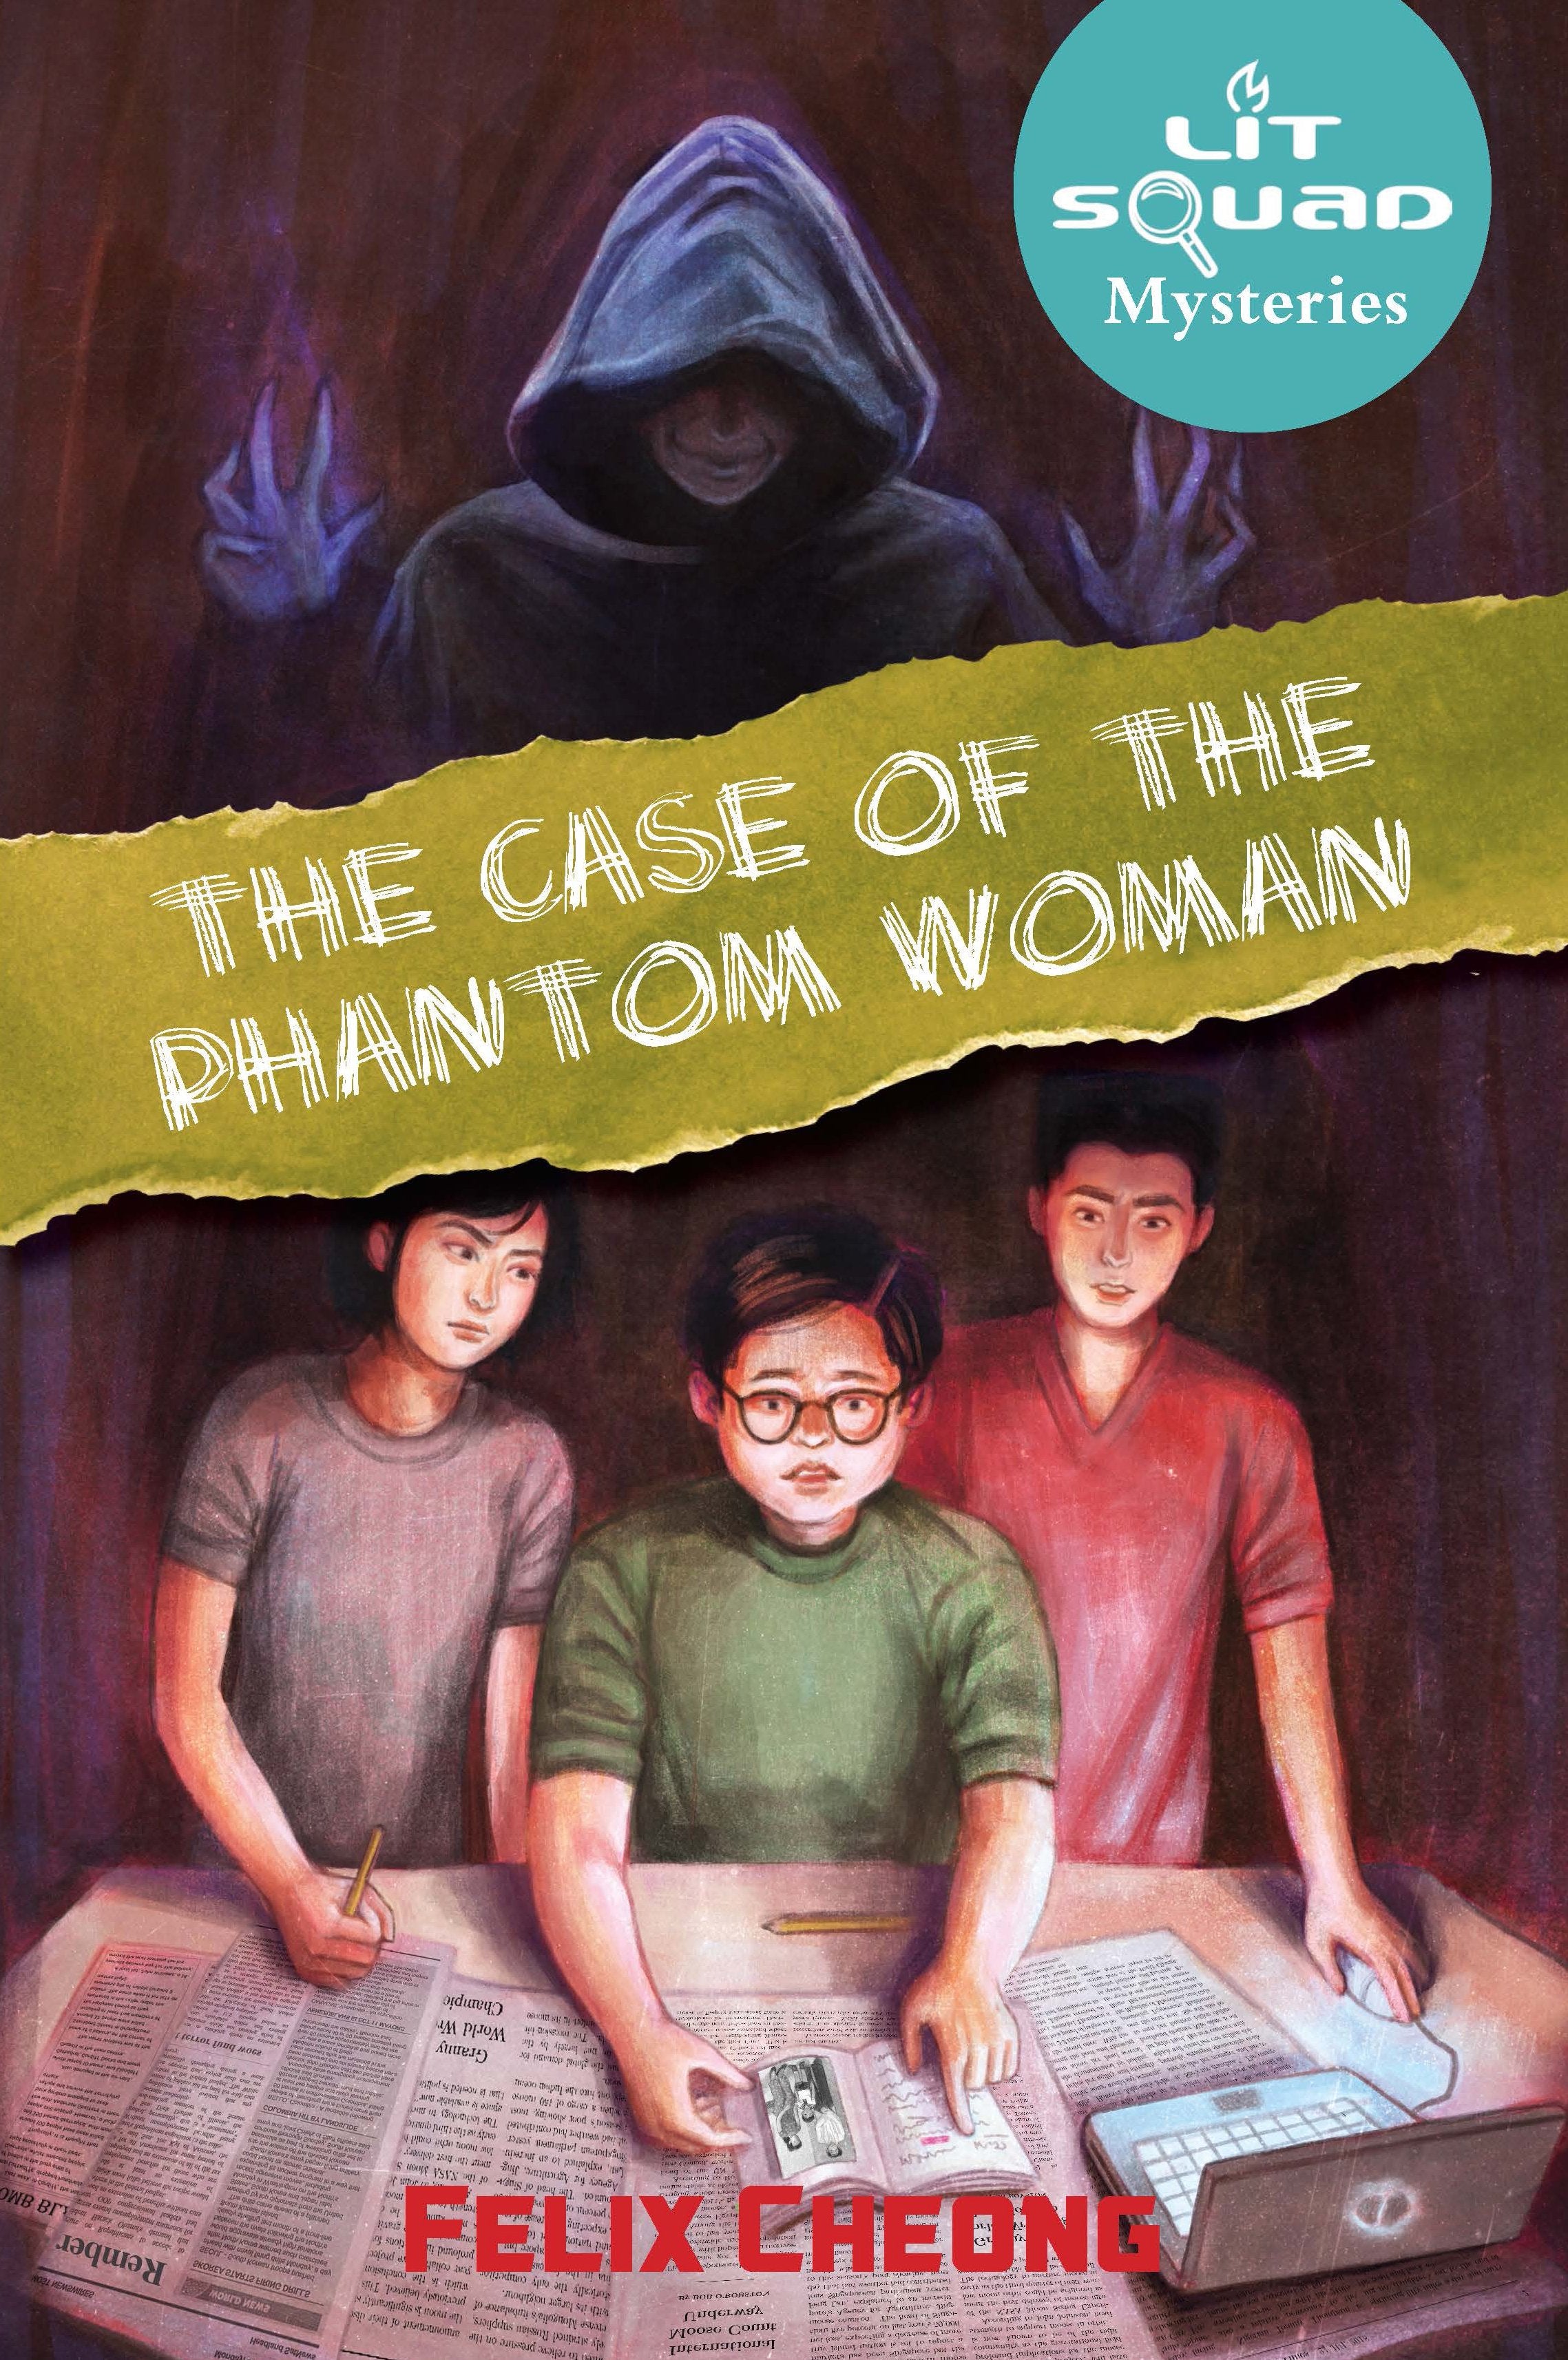 Lit Squad Mysteries: The Case of the Phantom Woman (Book 2)